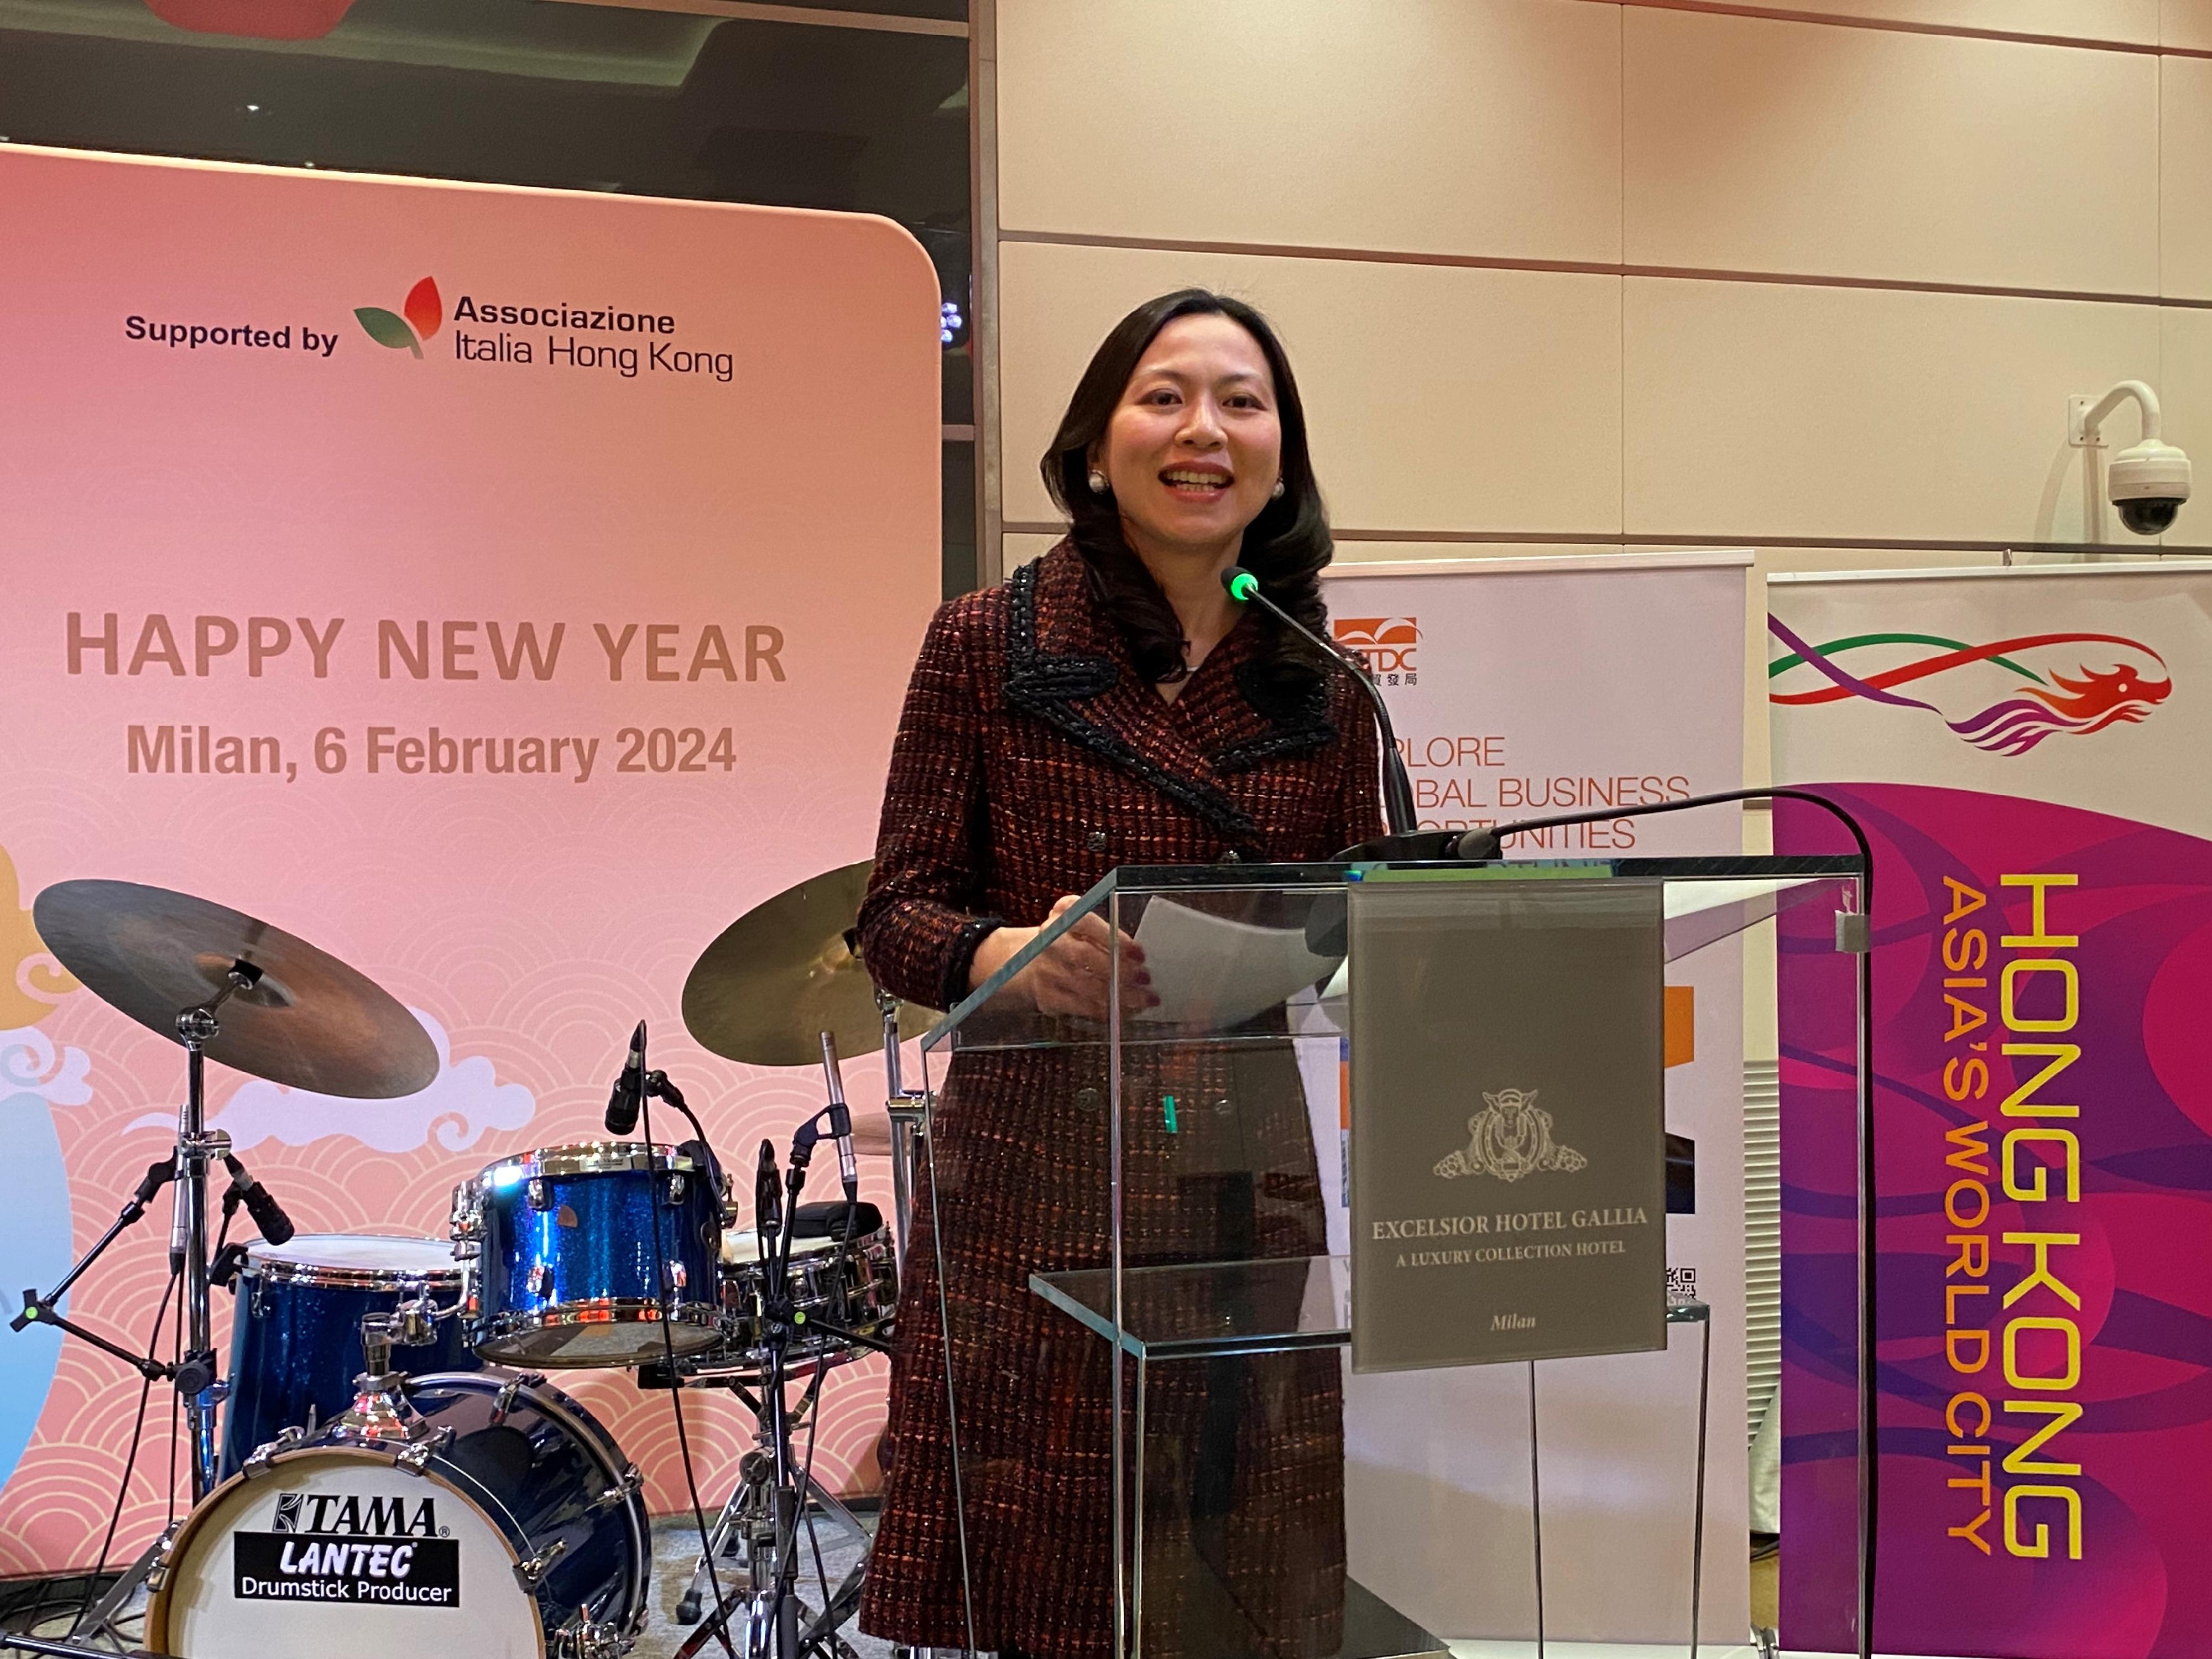 Deputy Representative of the Hong Kong Economic and Trade Office, Brussels, Miss Fiona Li, spoke at the Chinese New Year reception held in Milan, Italy on February 6 (Milan time).